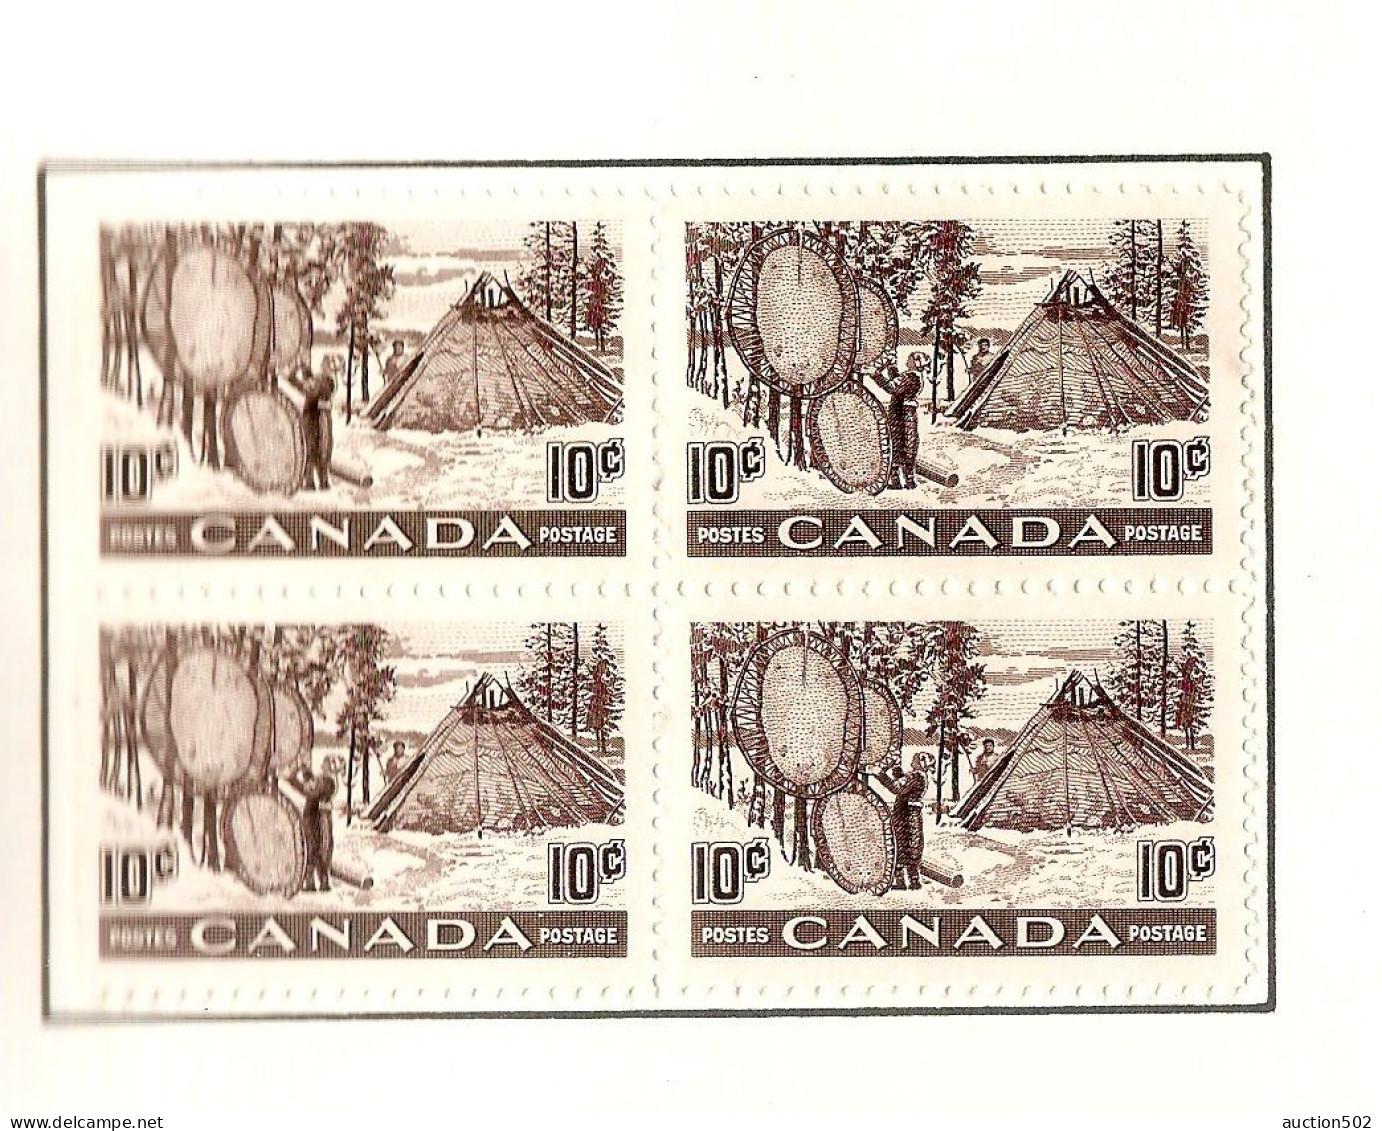 Canada  Stamps year 1952 block of 4 * HINGED 2 stamps